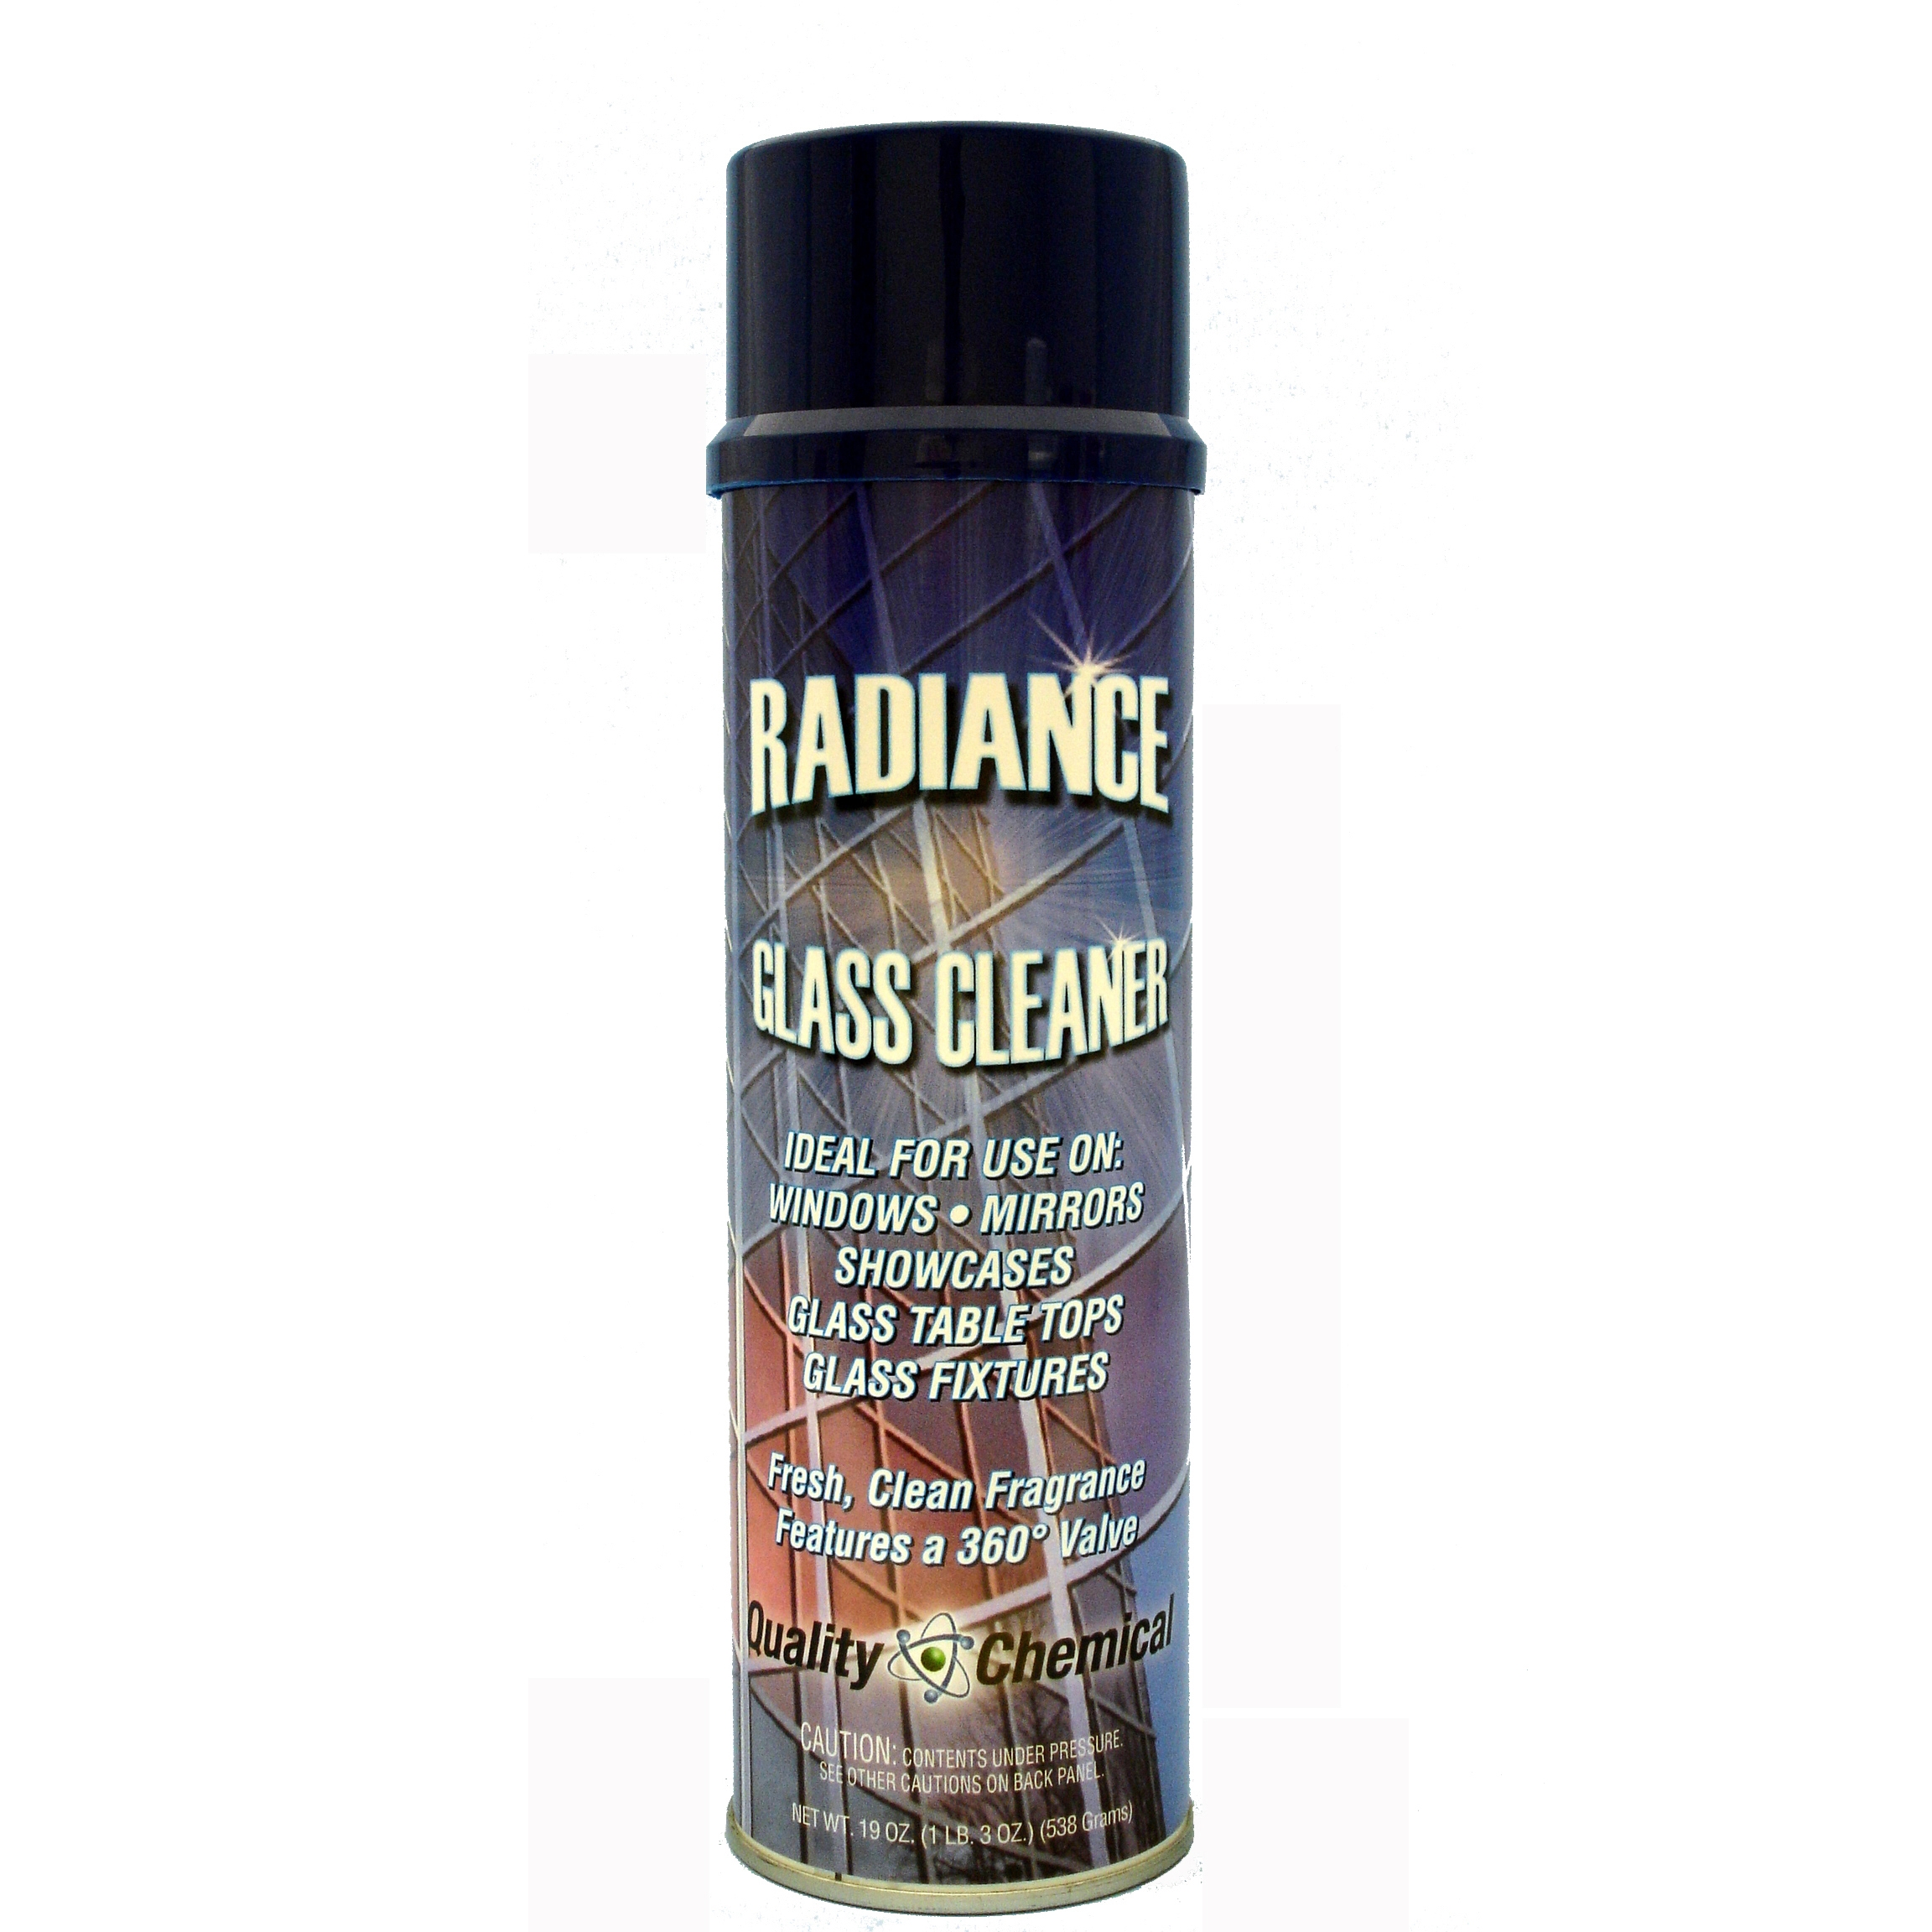 Radiance Glass Cleaner